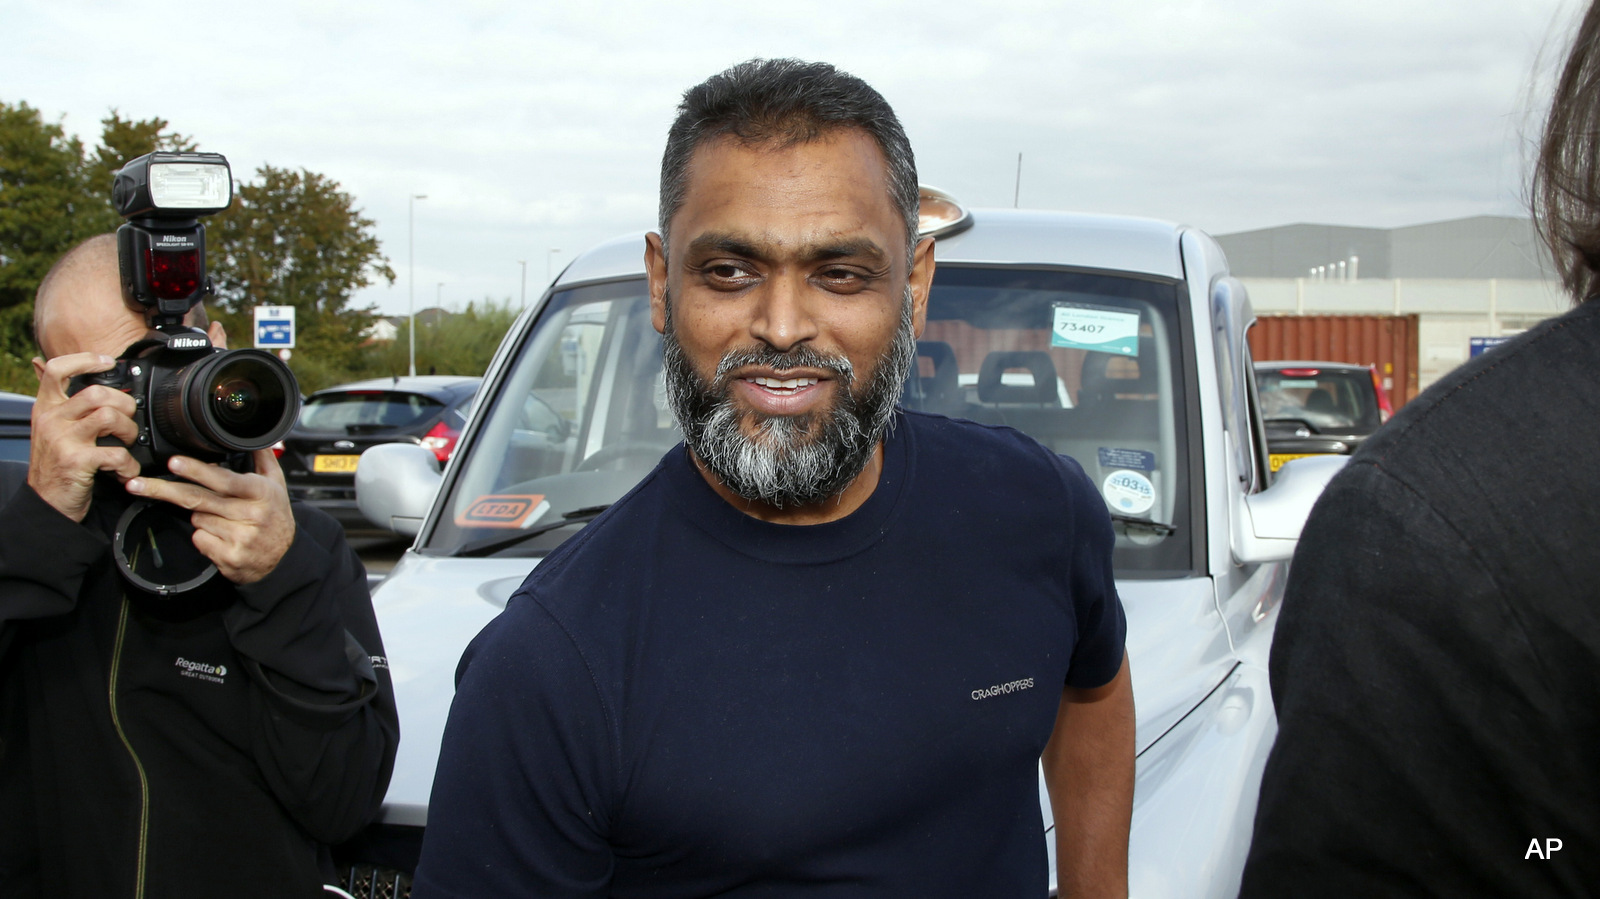 British Moazzam Begg leaves Belmarsh Prison in south London, after his release, Wednesday, Oct. 1, 2014. British prosecutors dropped terrorism charges Wednesday against the former Guantanamo Bay detainee who is a high-profile advocate for the rights of terror suspects.